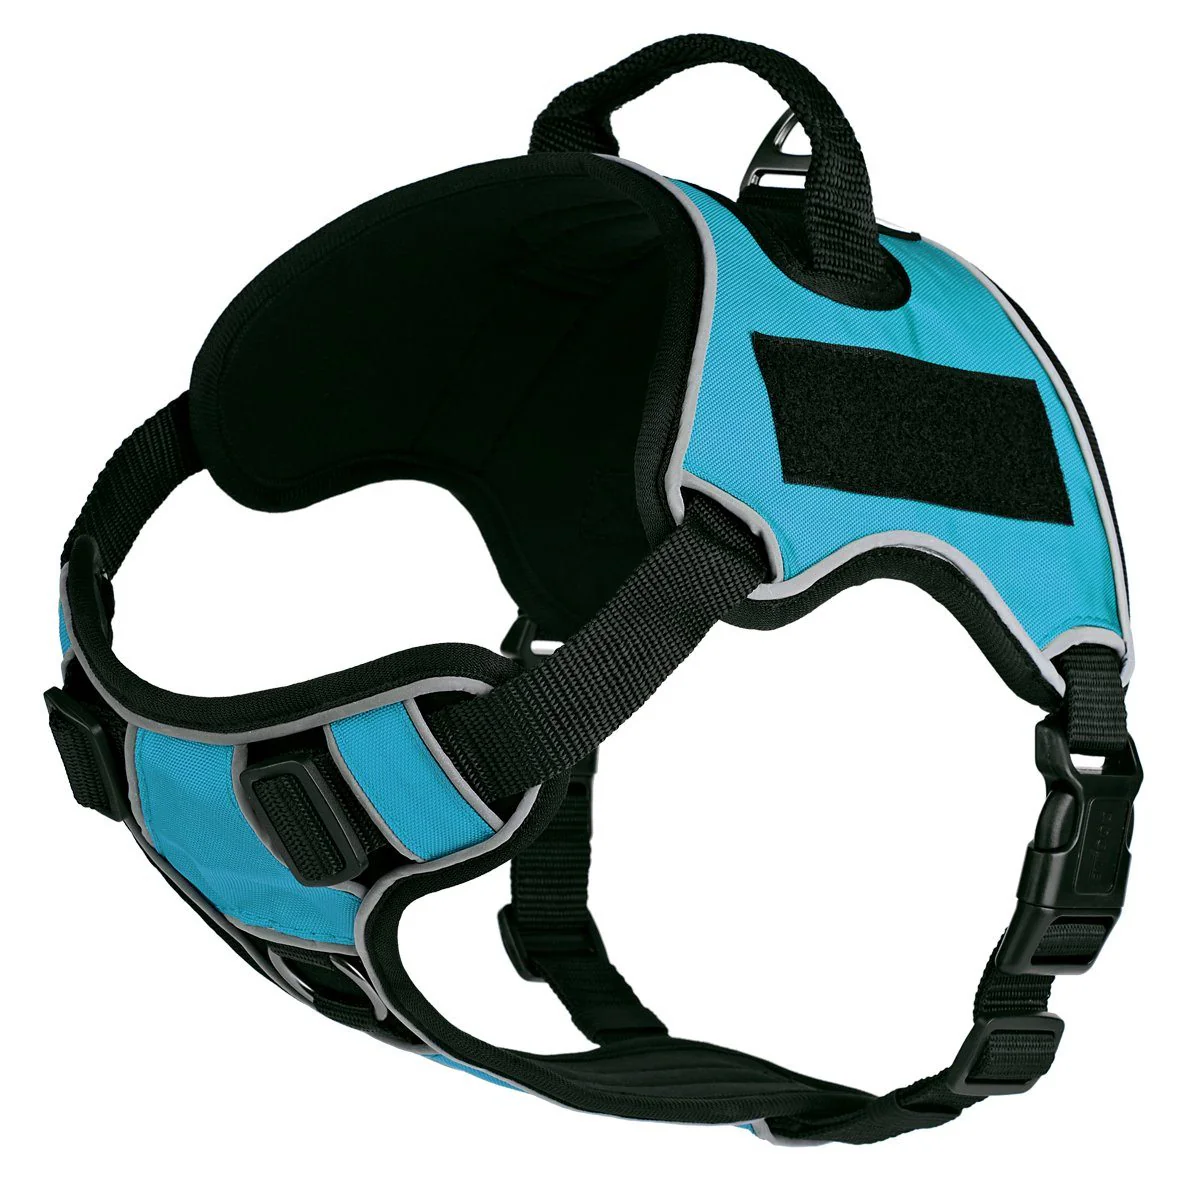 Dogline Quest Multipurpose No Pull Dog Harness - Teal